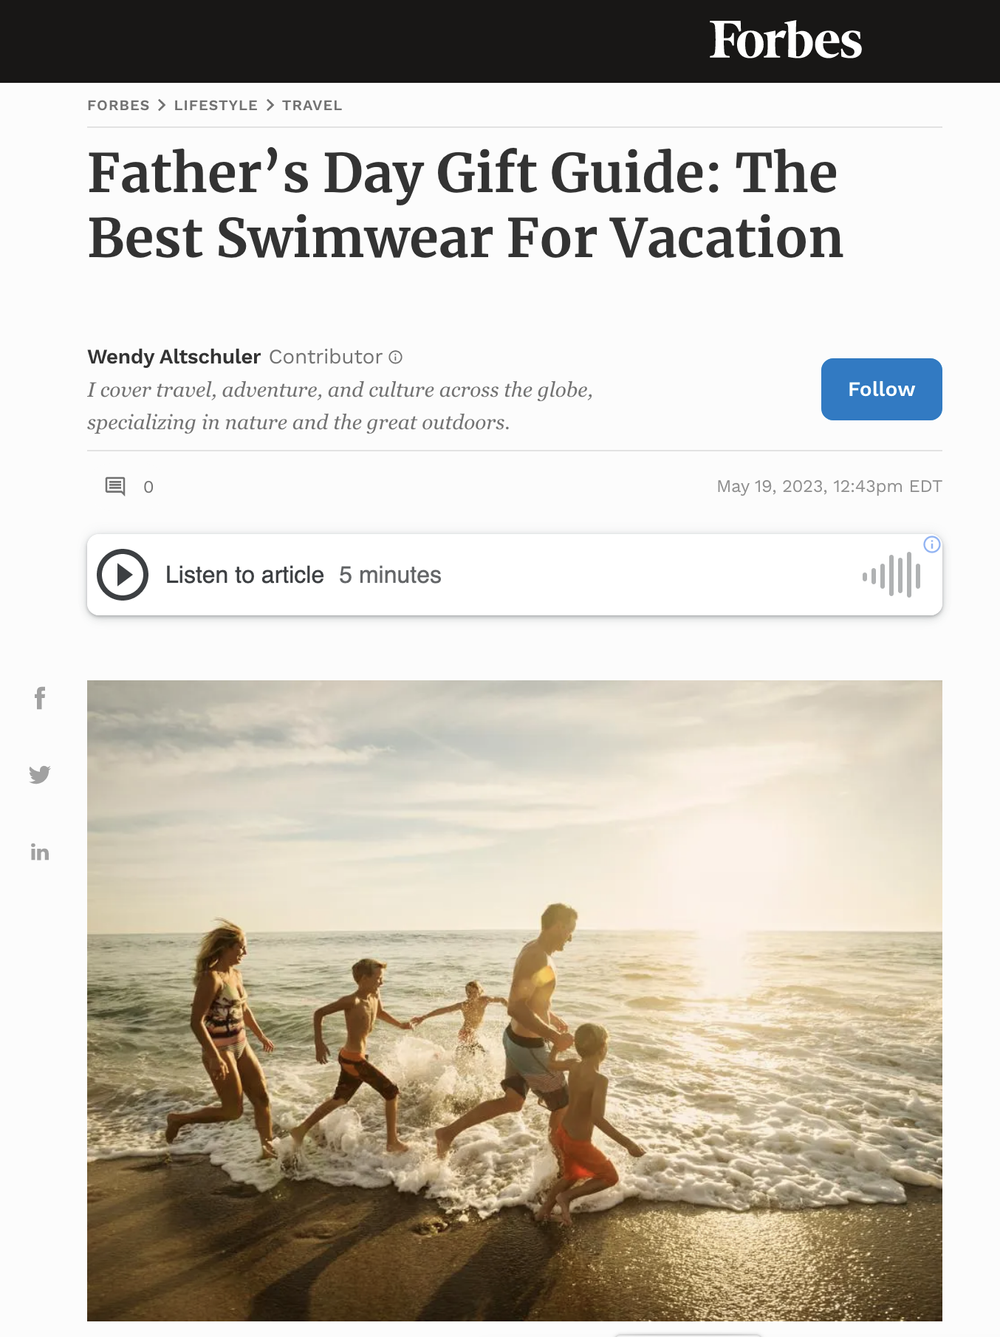 Father’s Day Gift Guide: The Best Swimwear For Vacation